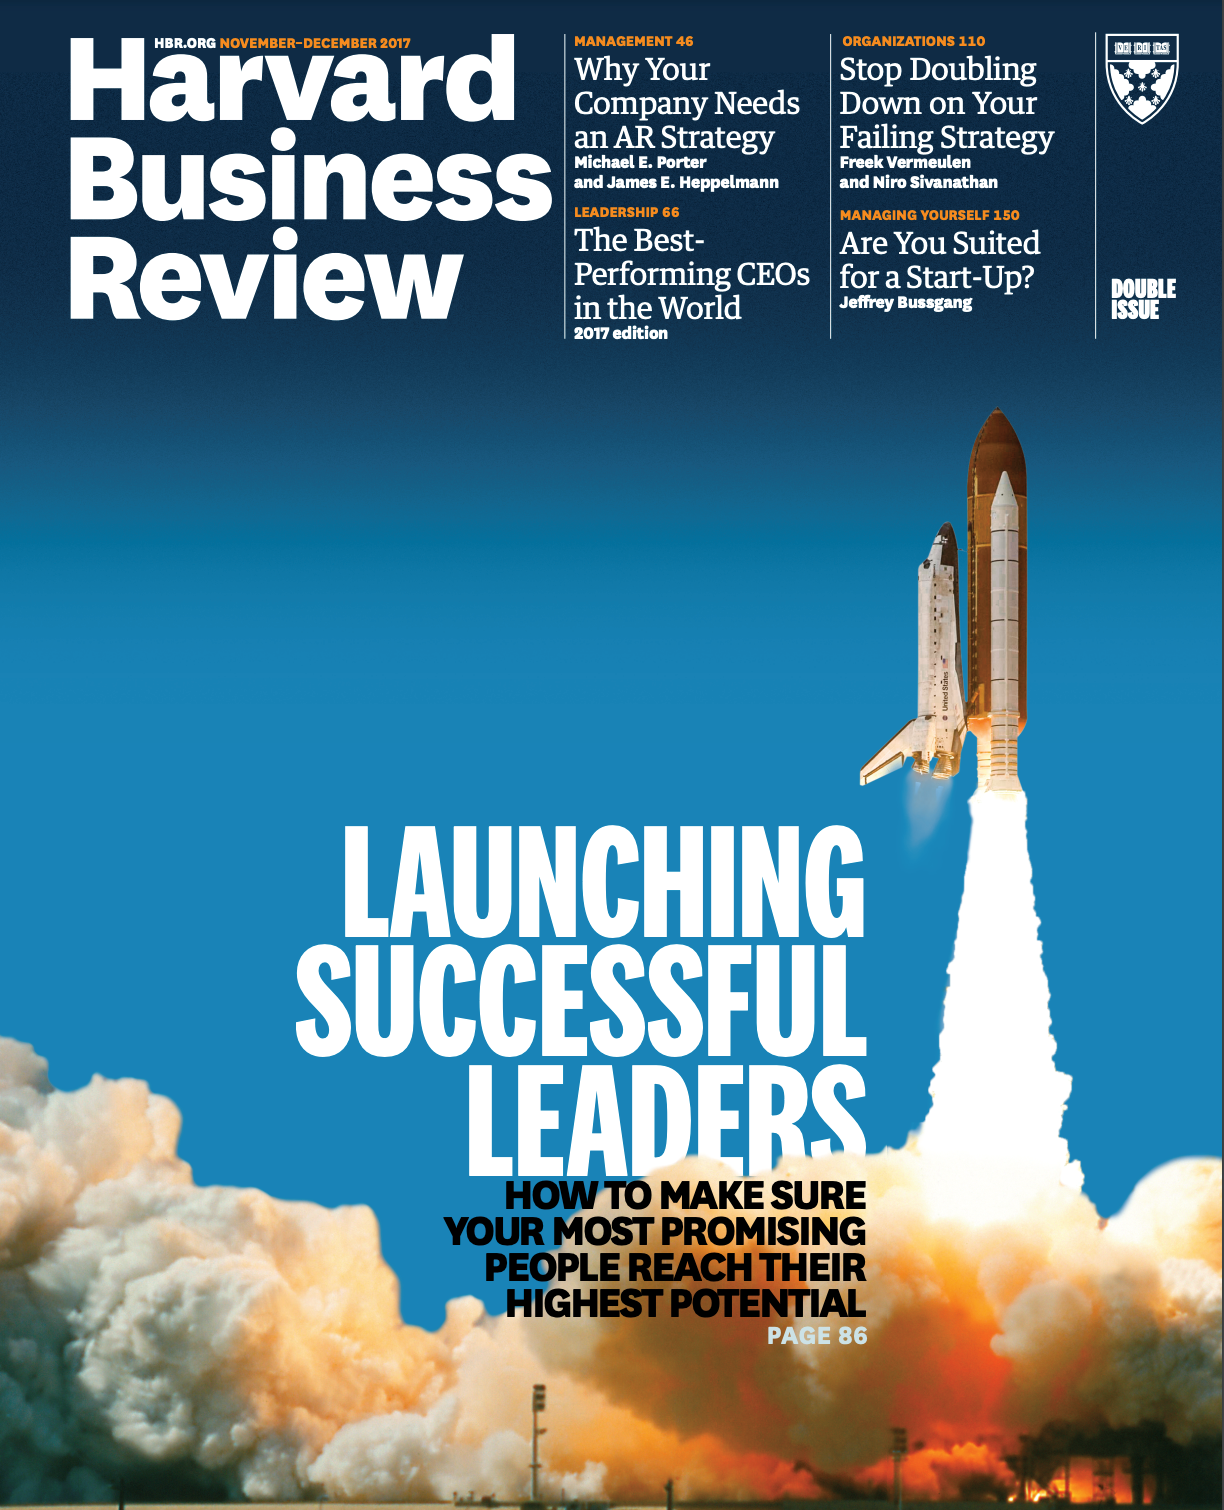 Harvard Business Review - Launching successful Leaders